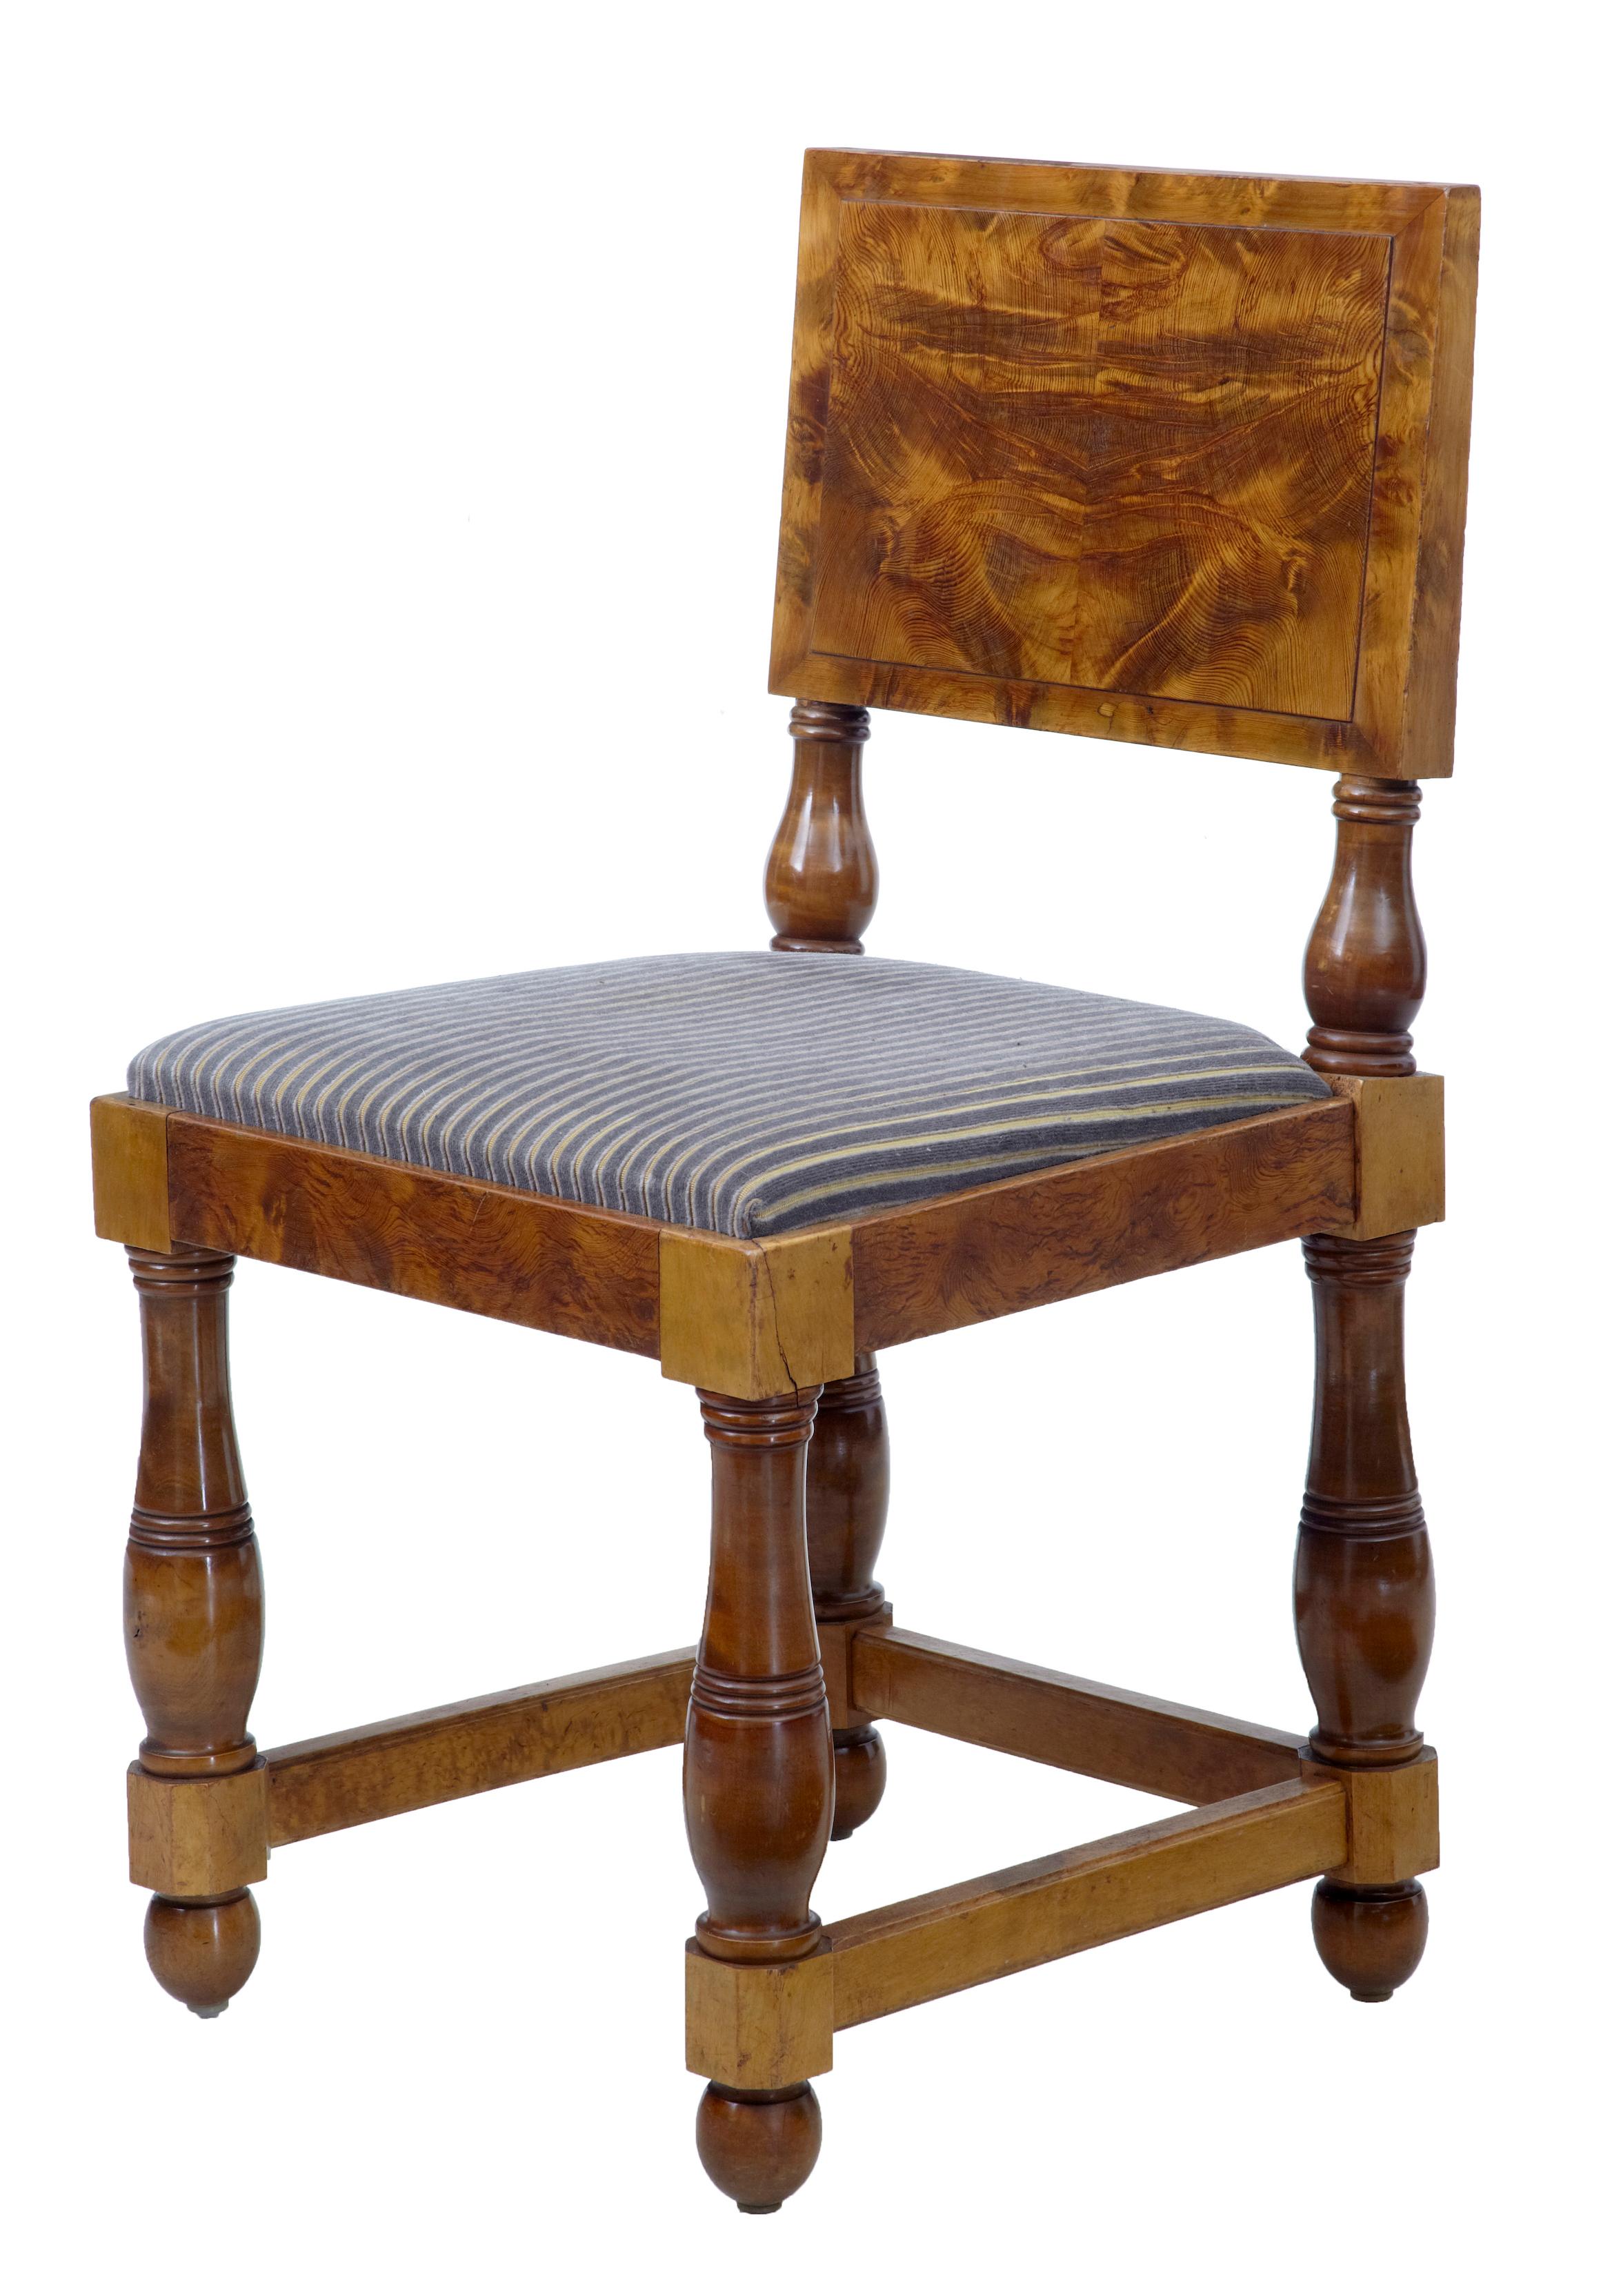 Unusual set of five pitch pine dining chairs, circa 1920.
Rich golden color with striking grain.
Standing on gun barrel turned legs.
Upholstery clean and ready for everyday use.

Measures: Height: 34 1/3